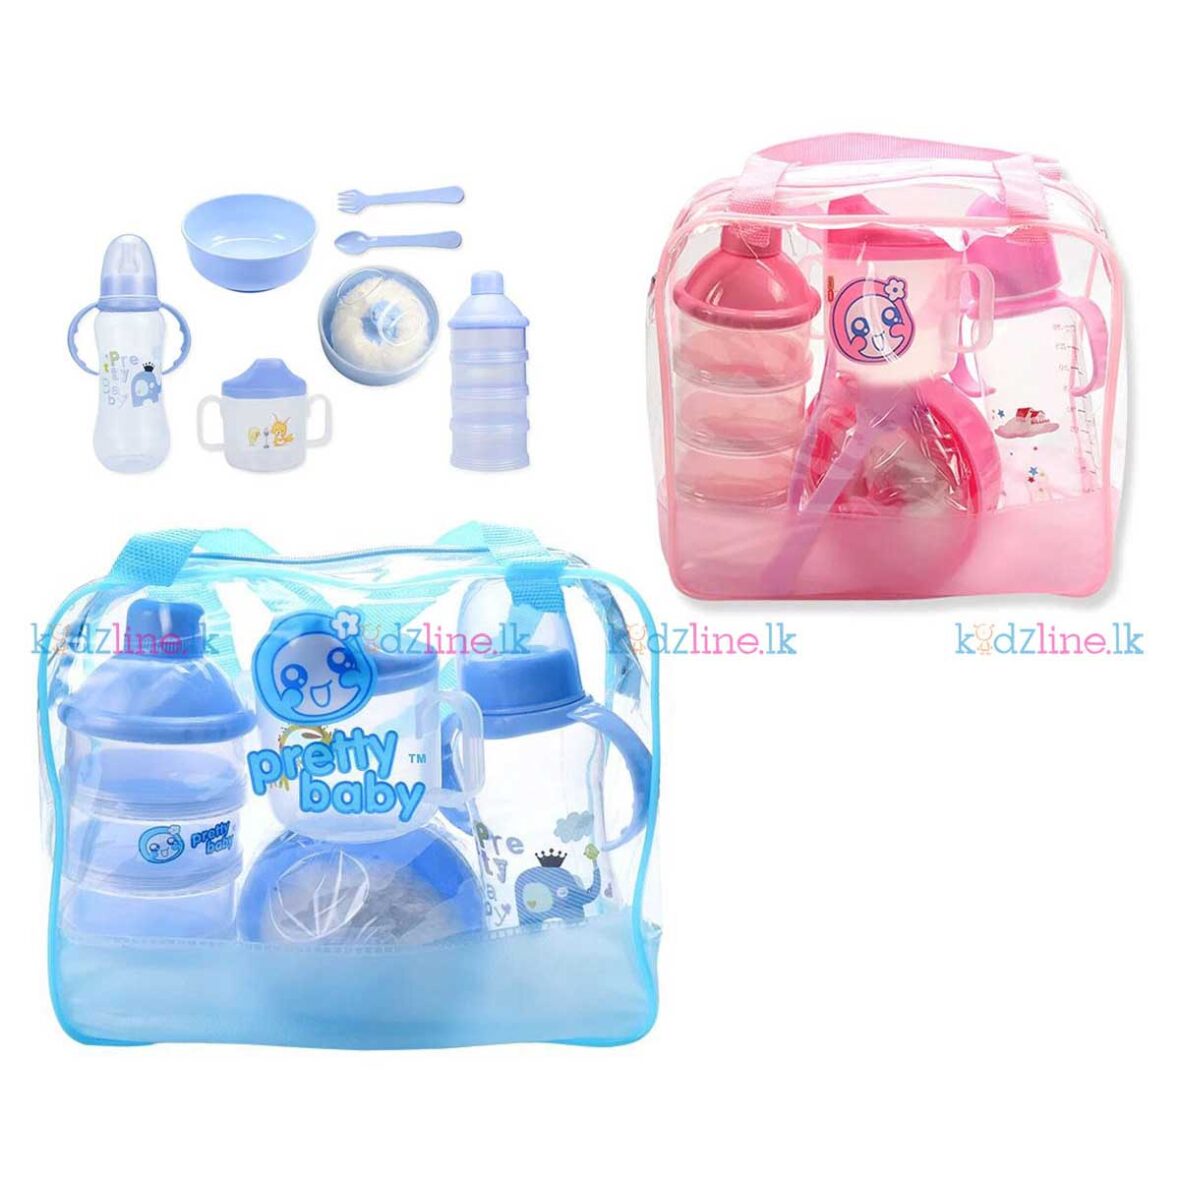 PrettyBaby Gift Bag